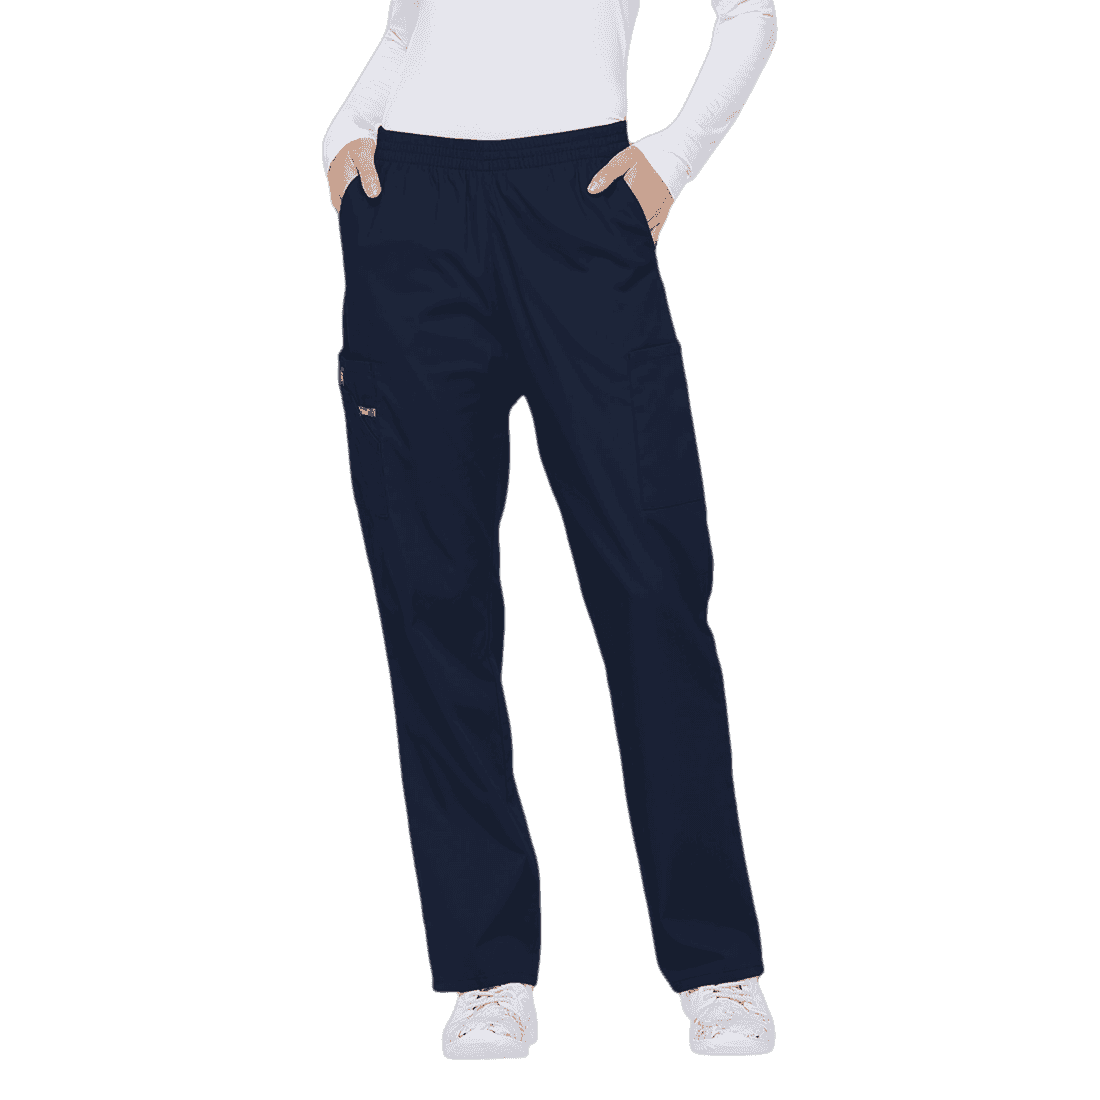 Women's Natural Rise Pull-On Scrub Trousers 86106 Navy